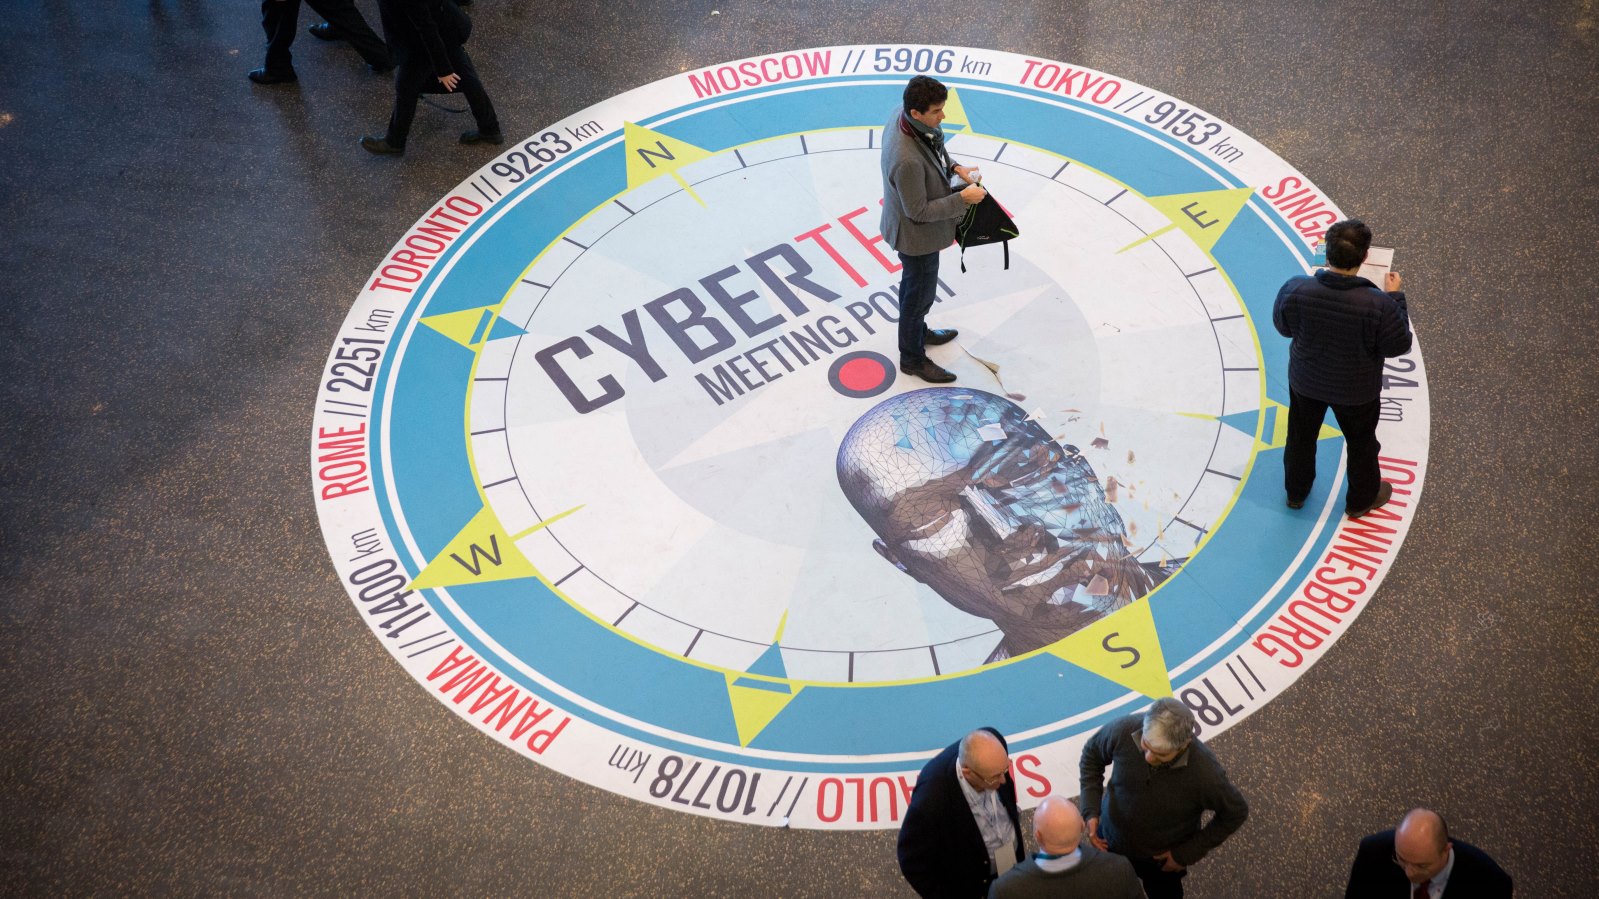 Photo of Cybertech Israel Conference and Expo by Miriam Alster/FLASH90